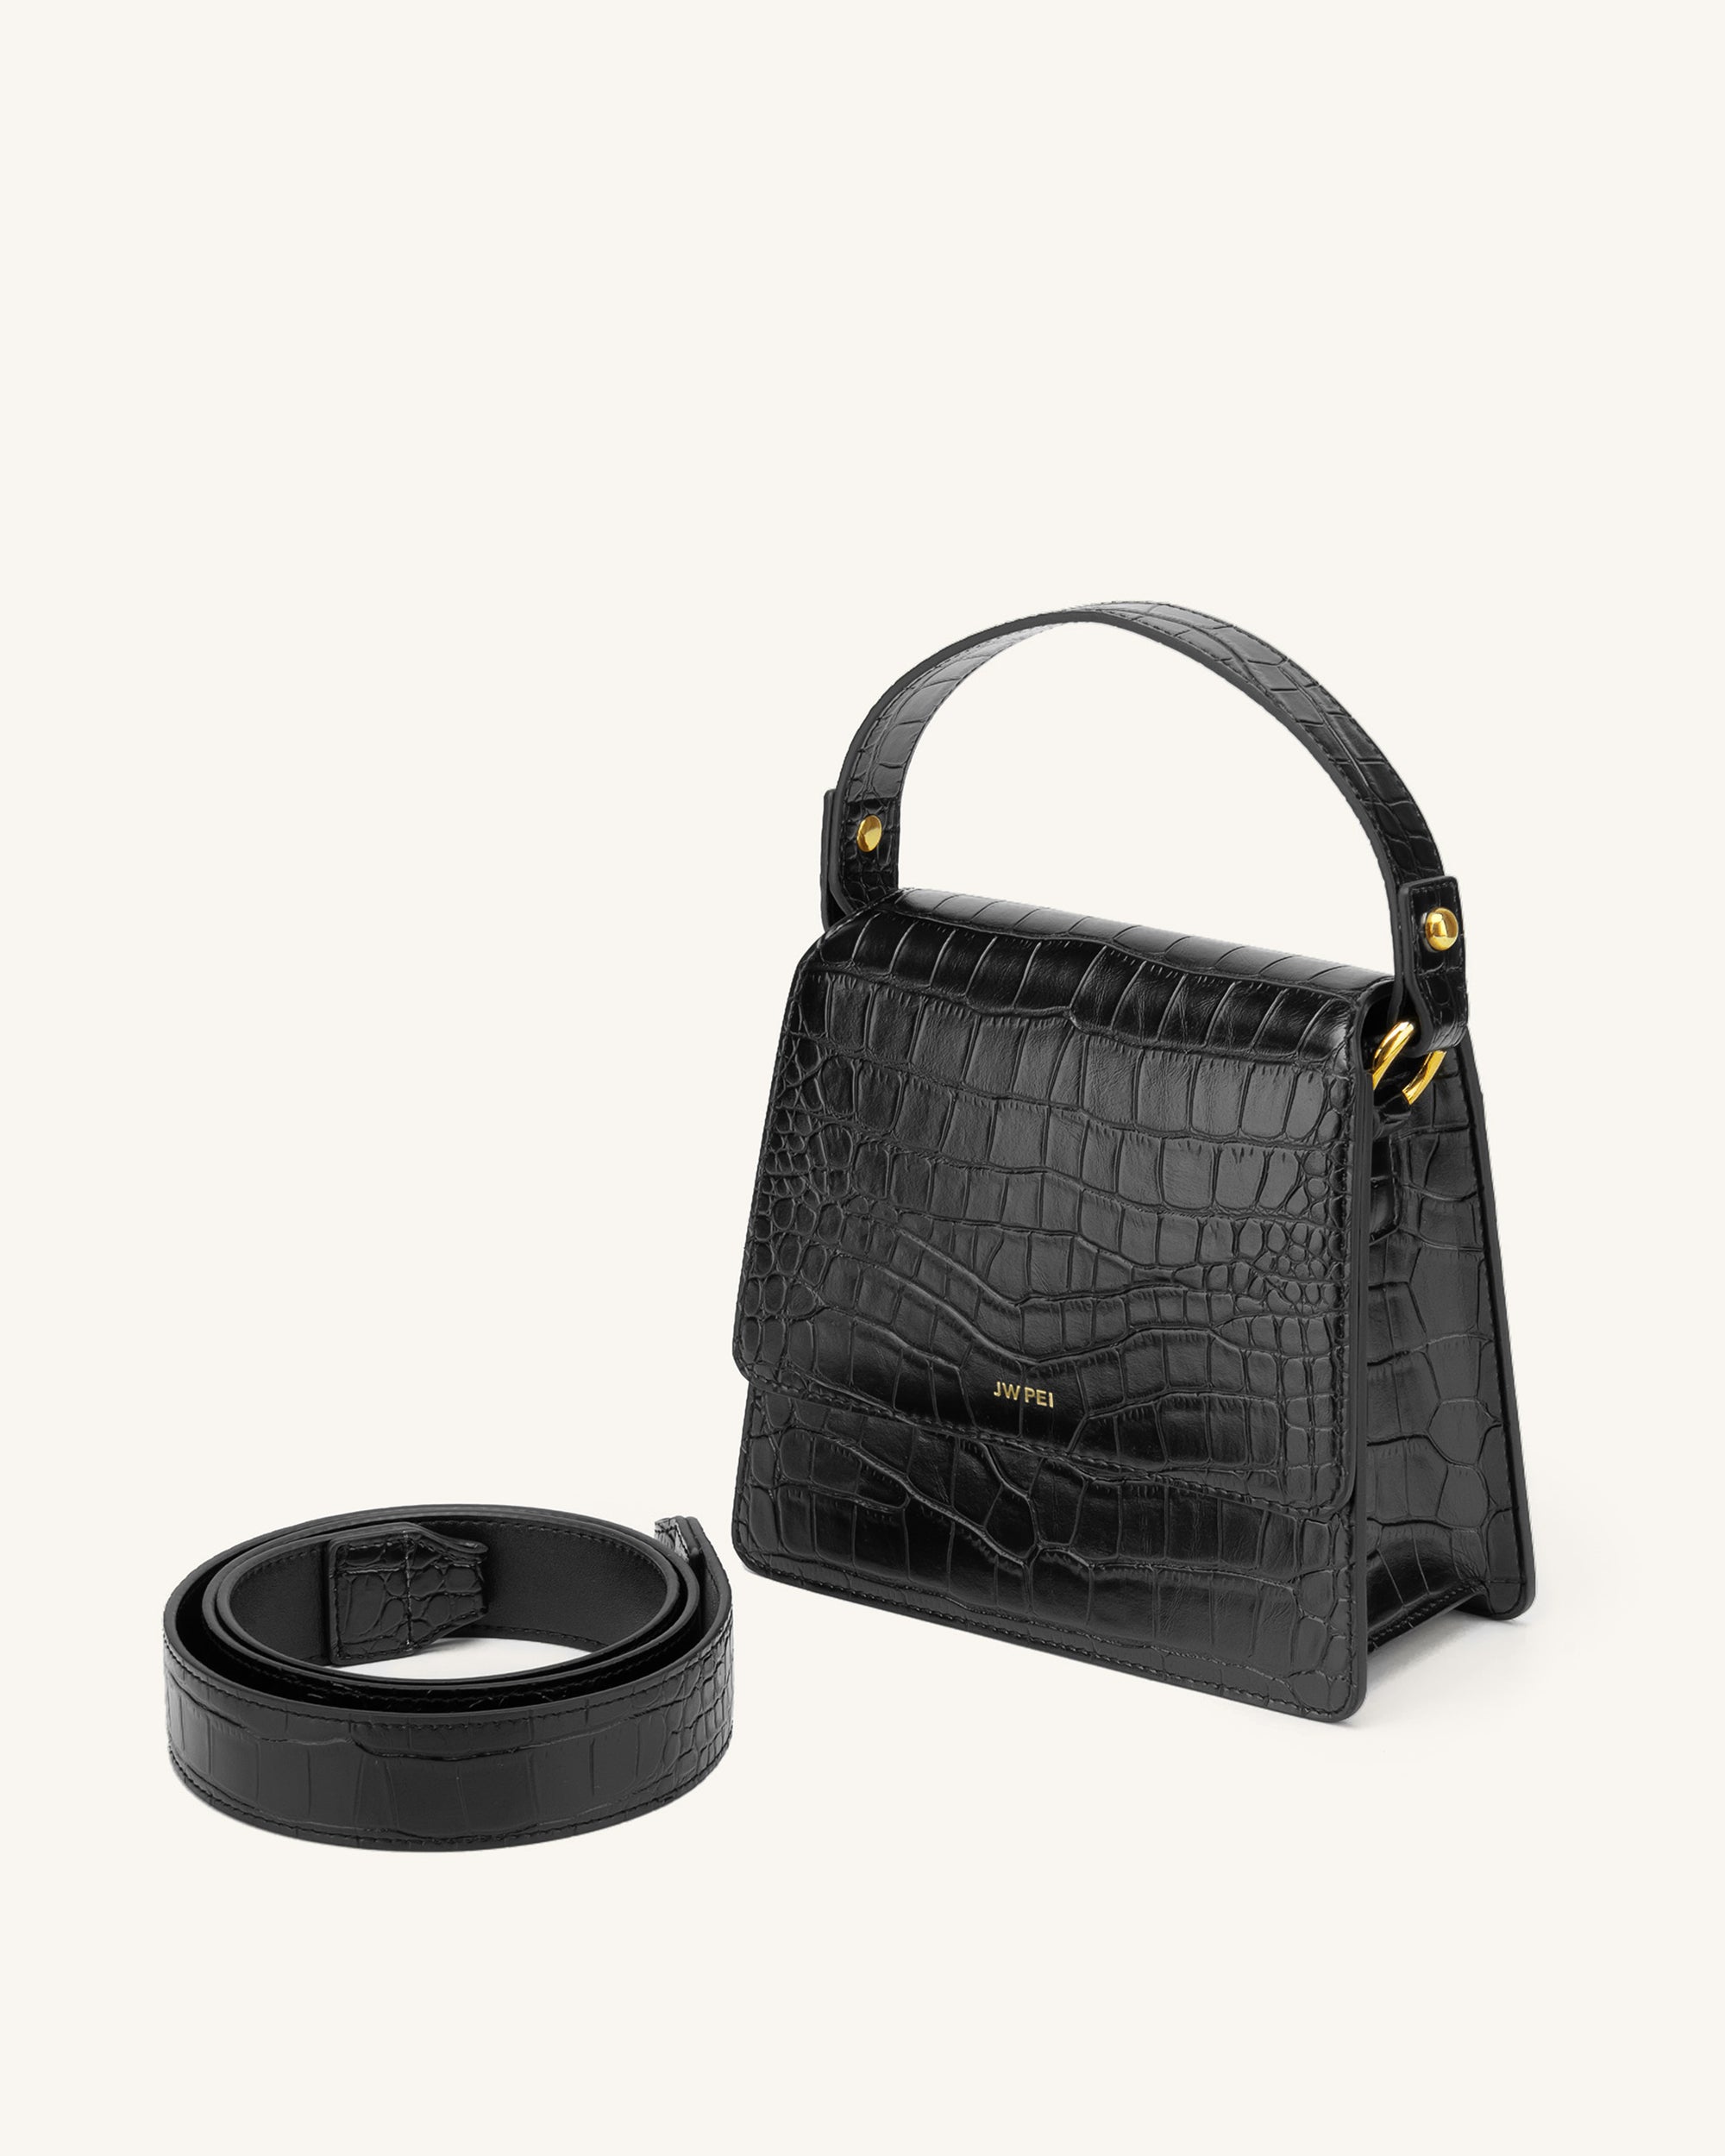 Top Handle & Satchel Bag - Sign Up And Save 10% Off - JW PEI